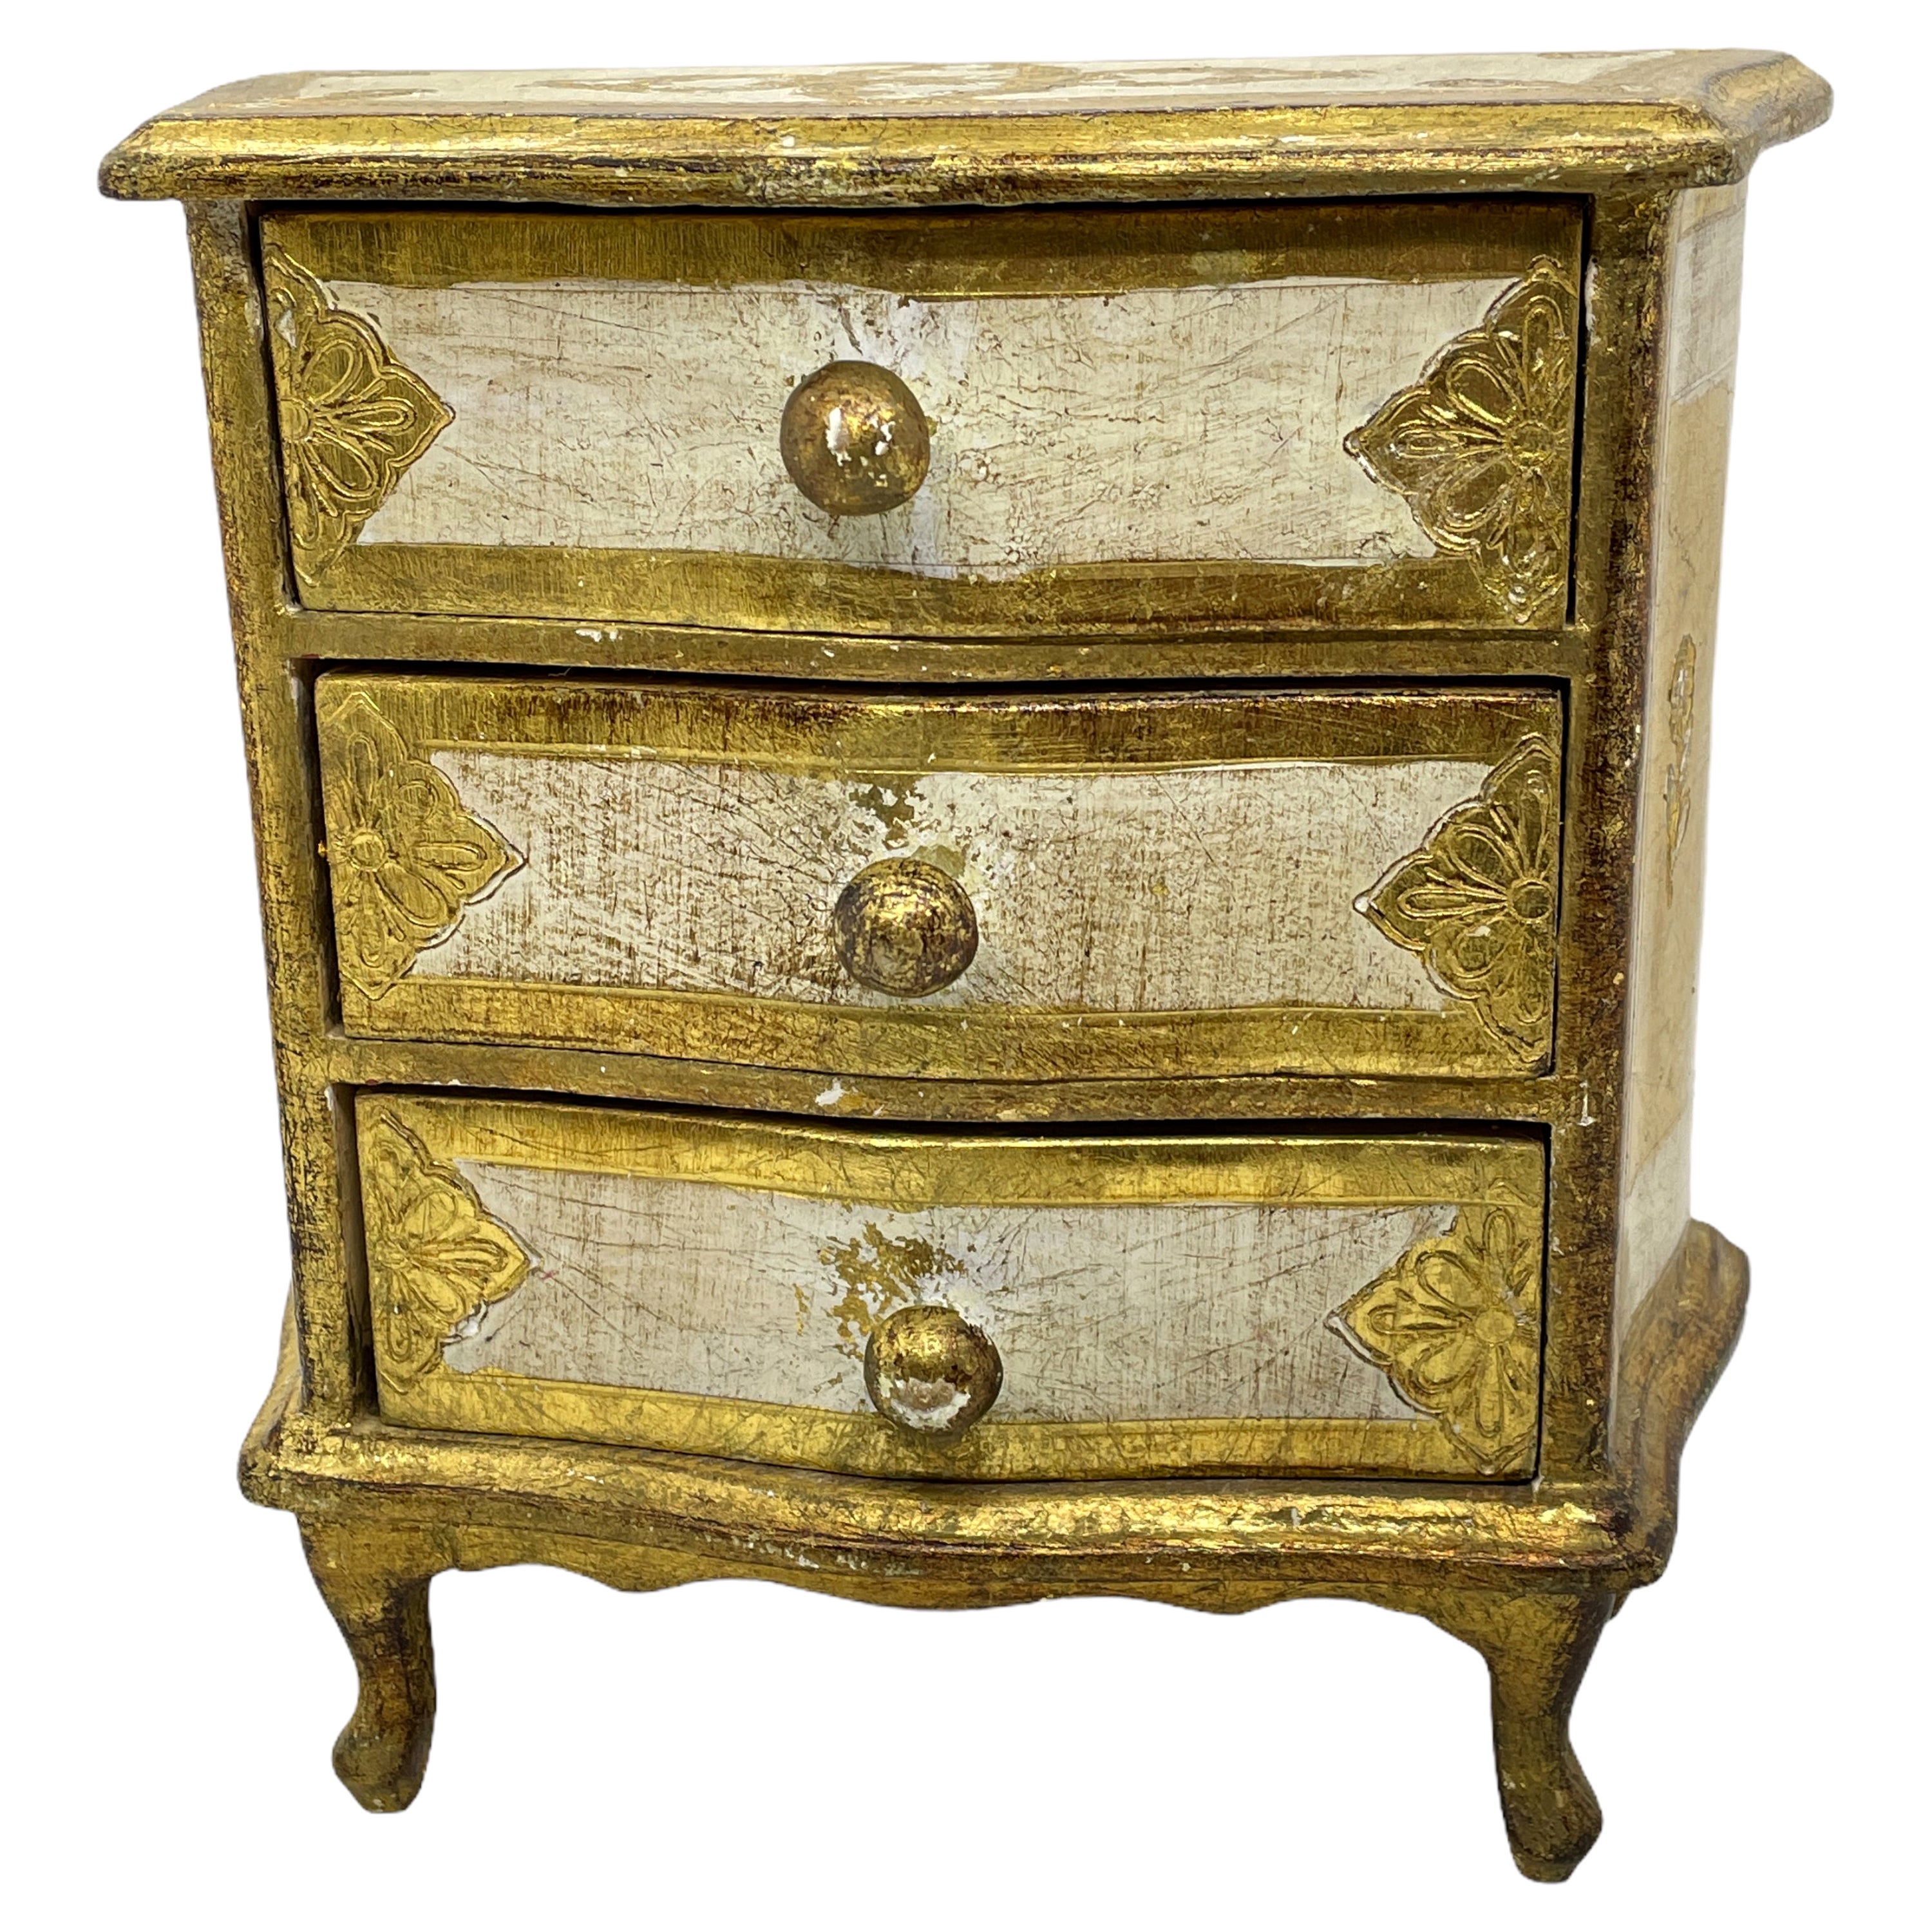 Italian Florentine Giltwood Jewelry Box Chest of Drawers Toleware Tole, 1950s For Sale